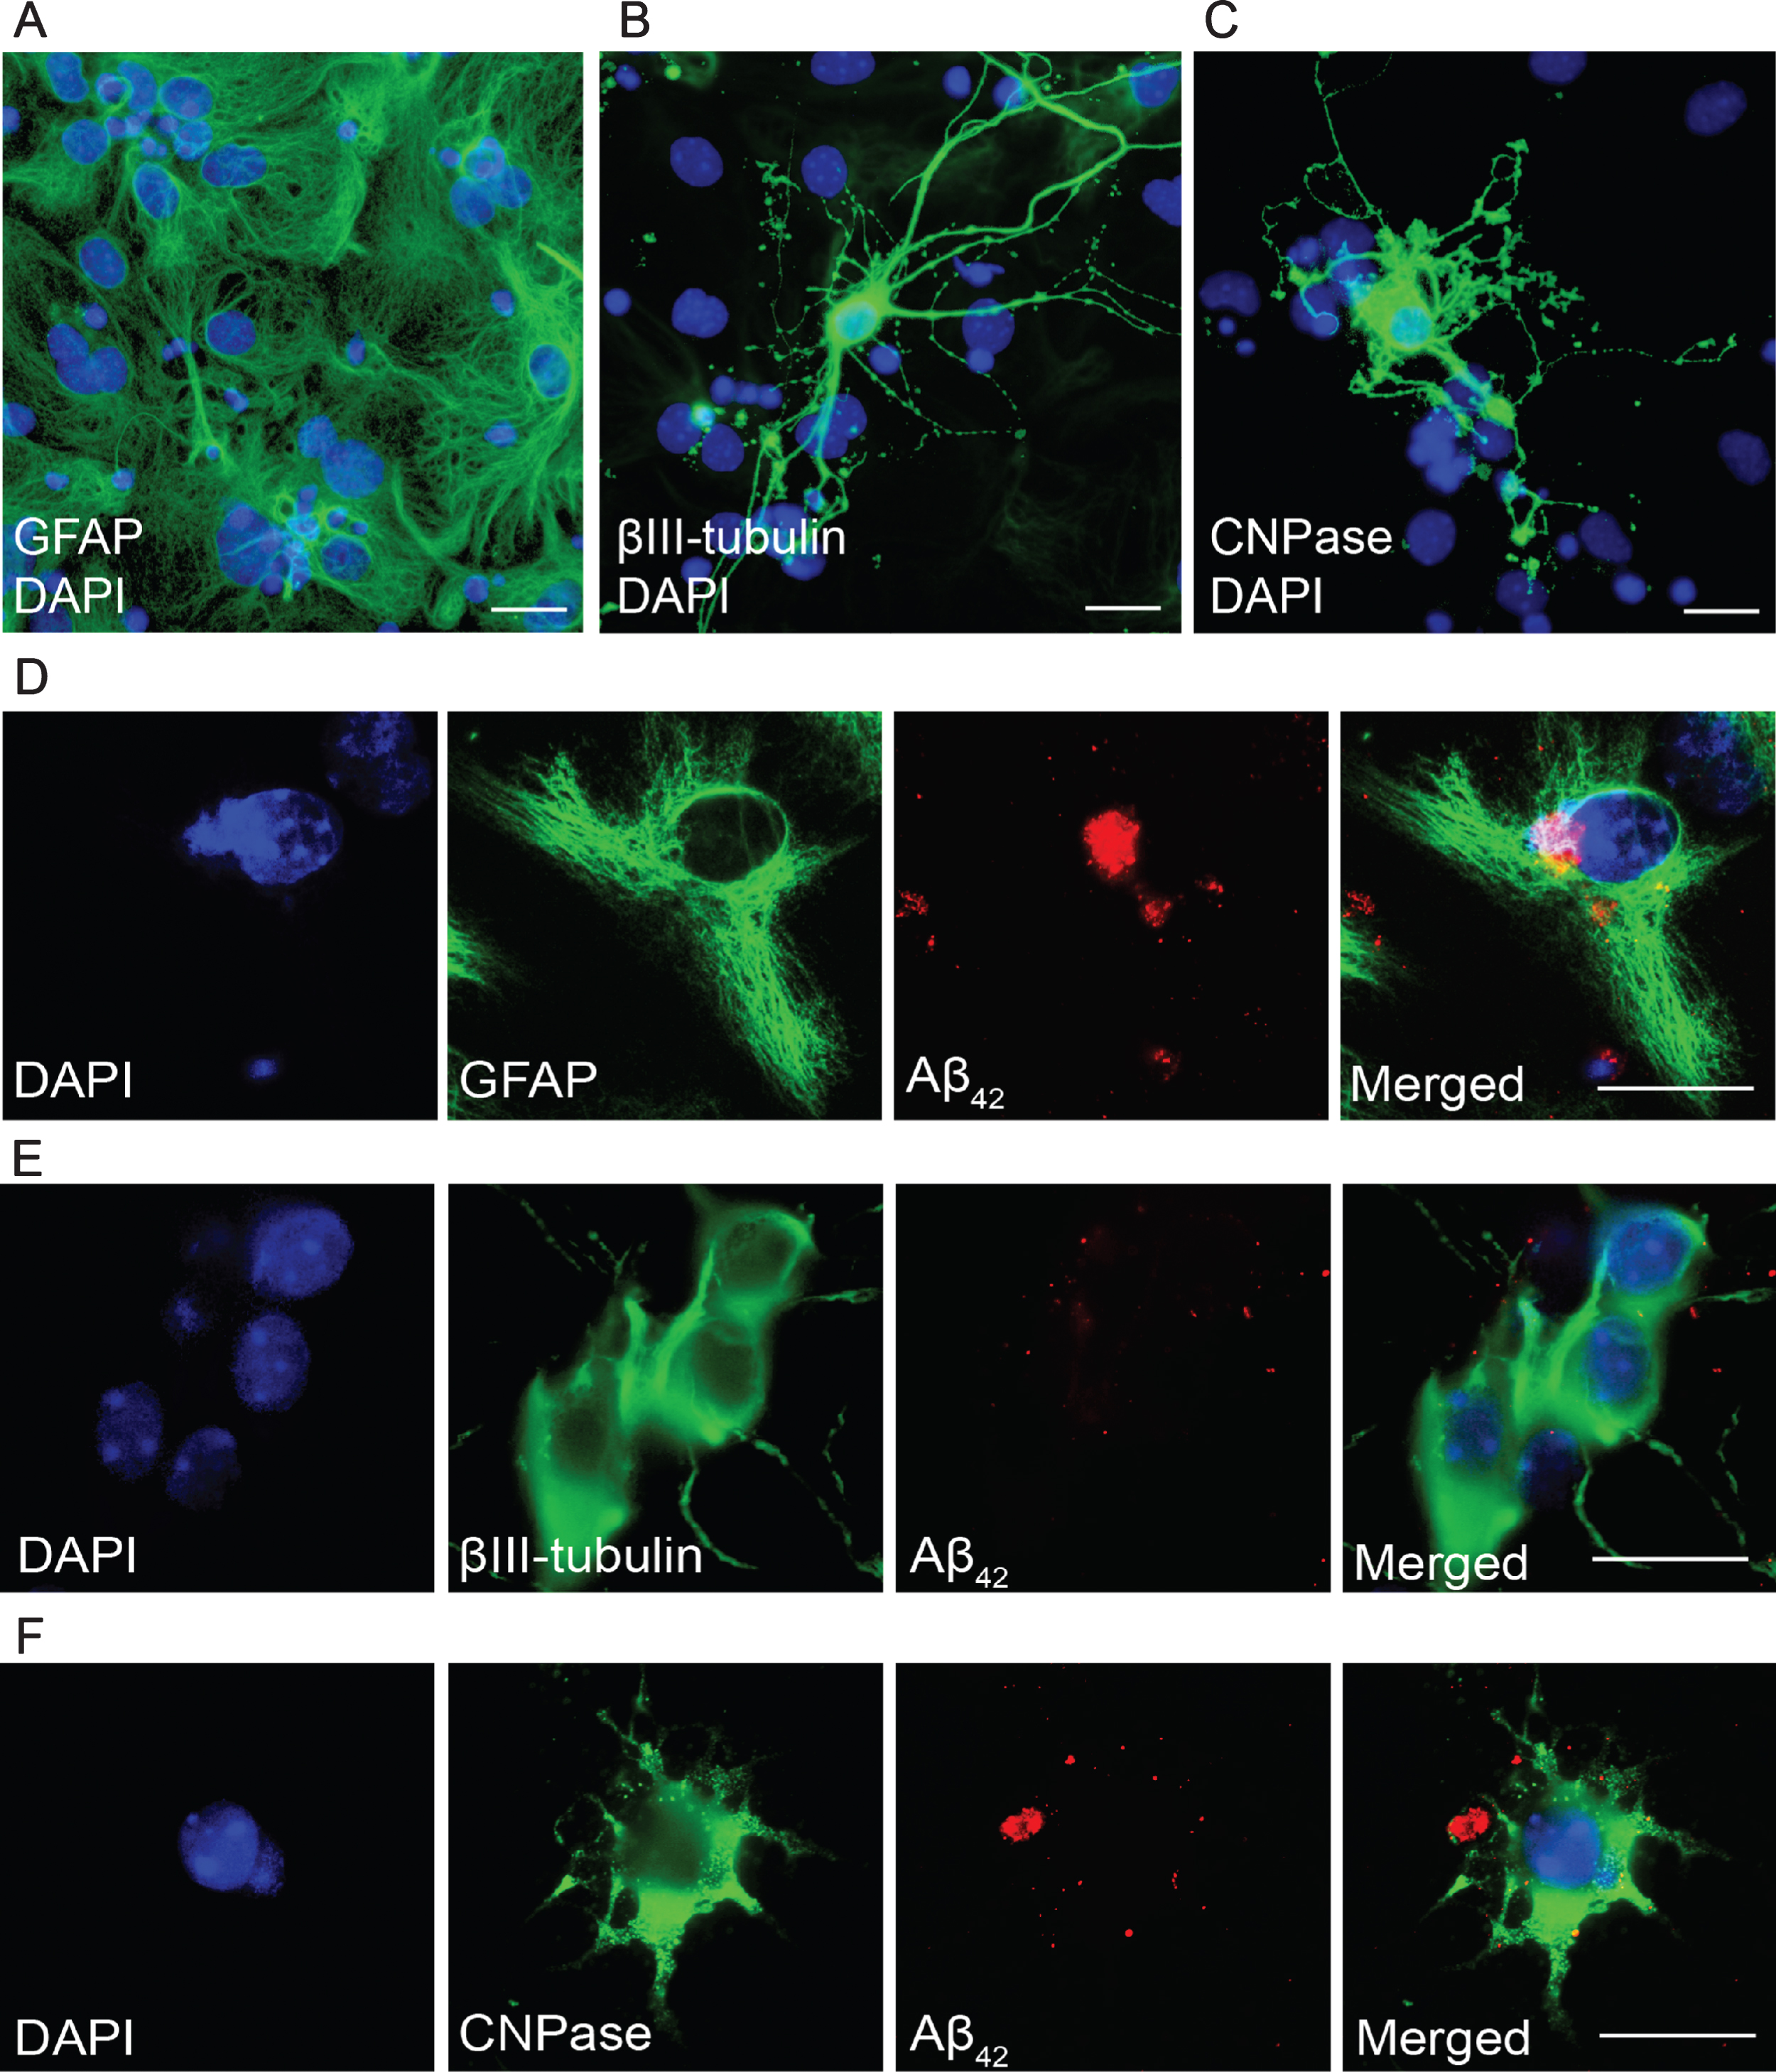 Aβ42 protofibrils are accumulated in astrocytes. Immunocytochemistry demonstrating the three cell types in the unexposed co-culture system; astrocytes (A), neurons (B), and oligodendrocytes (C). Astrocytes exposed to Aβ42 protofibrils for 2 days contained large deposits of Aβ42 (D). Neurons lacked detectable levels of intracellular Aβ42 (E), but the few oligodendrocytes in the culture showed some Aβ42 accumulation (F). DAPI (blue), GFAP, βIII-tubulin, CNPase (all green), and Aβ42 (red). Scale bars: A-F = 20μm.